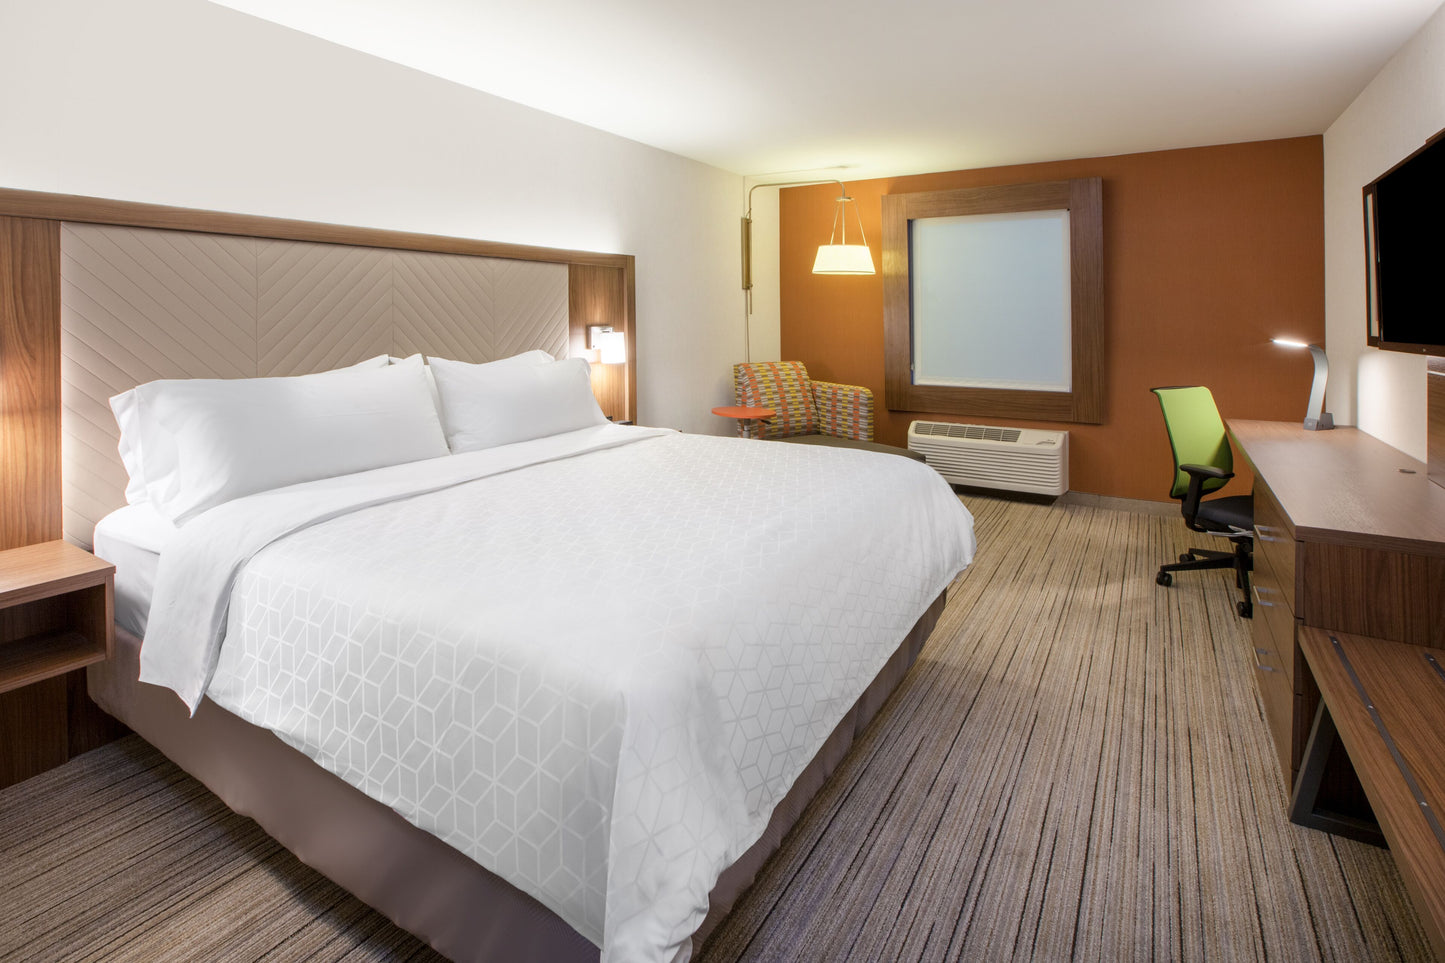 Hotel Review: Holiday Inn Express And Suites Halifax (Reviews, Pricing & Amenities)